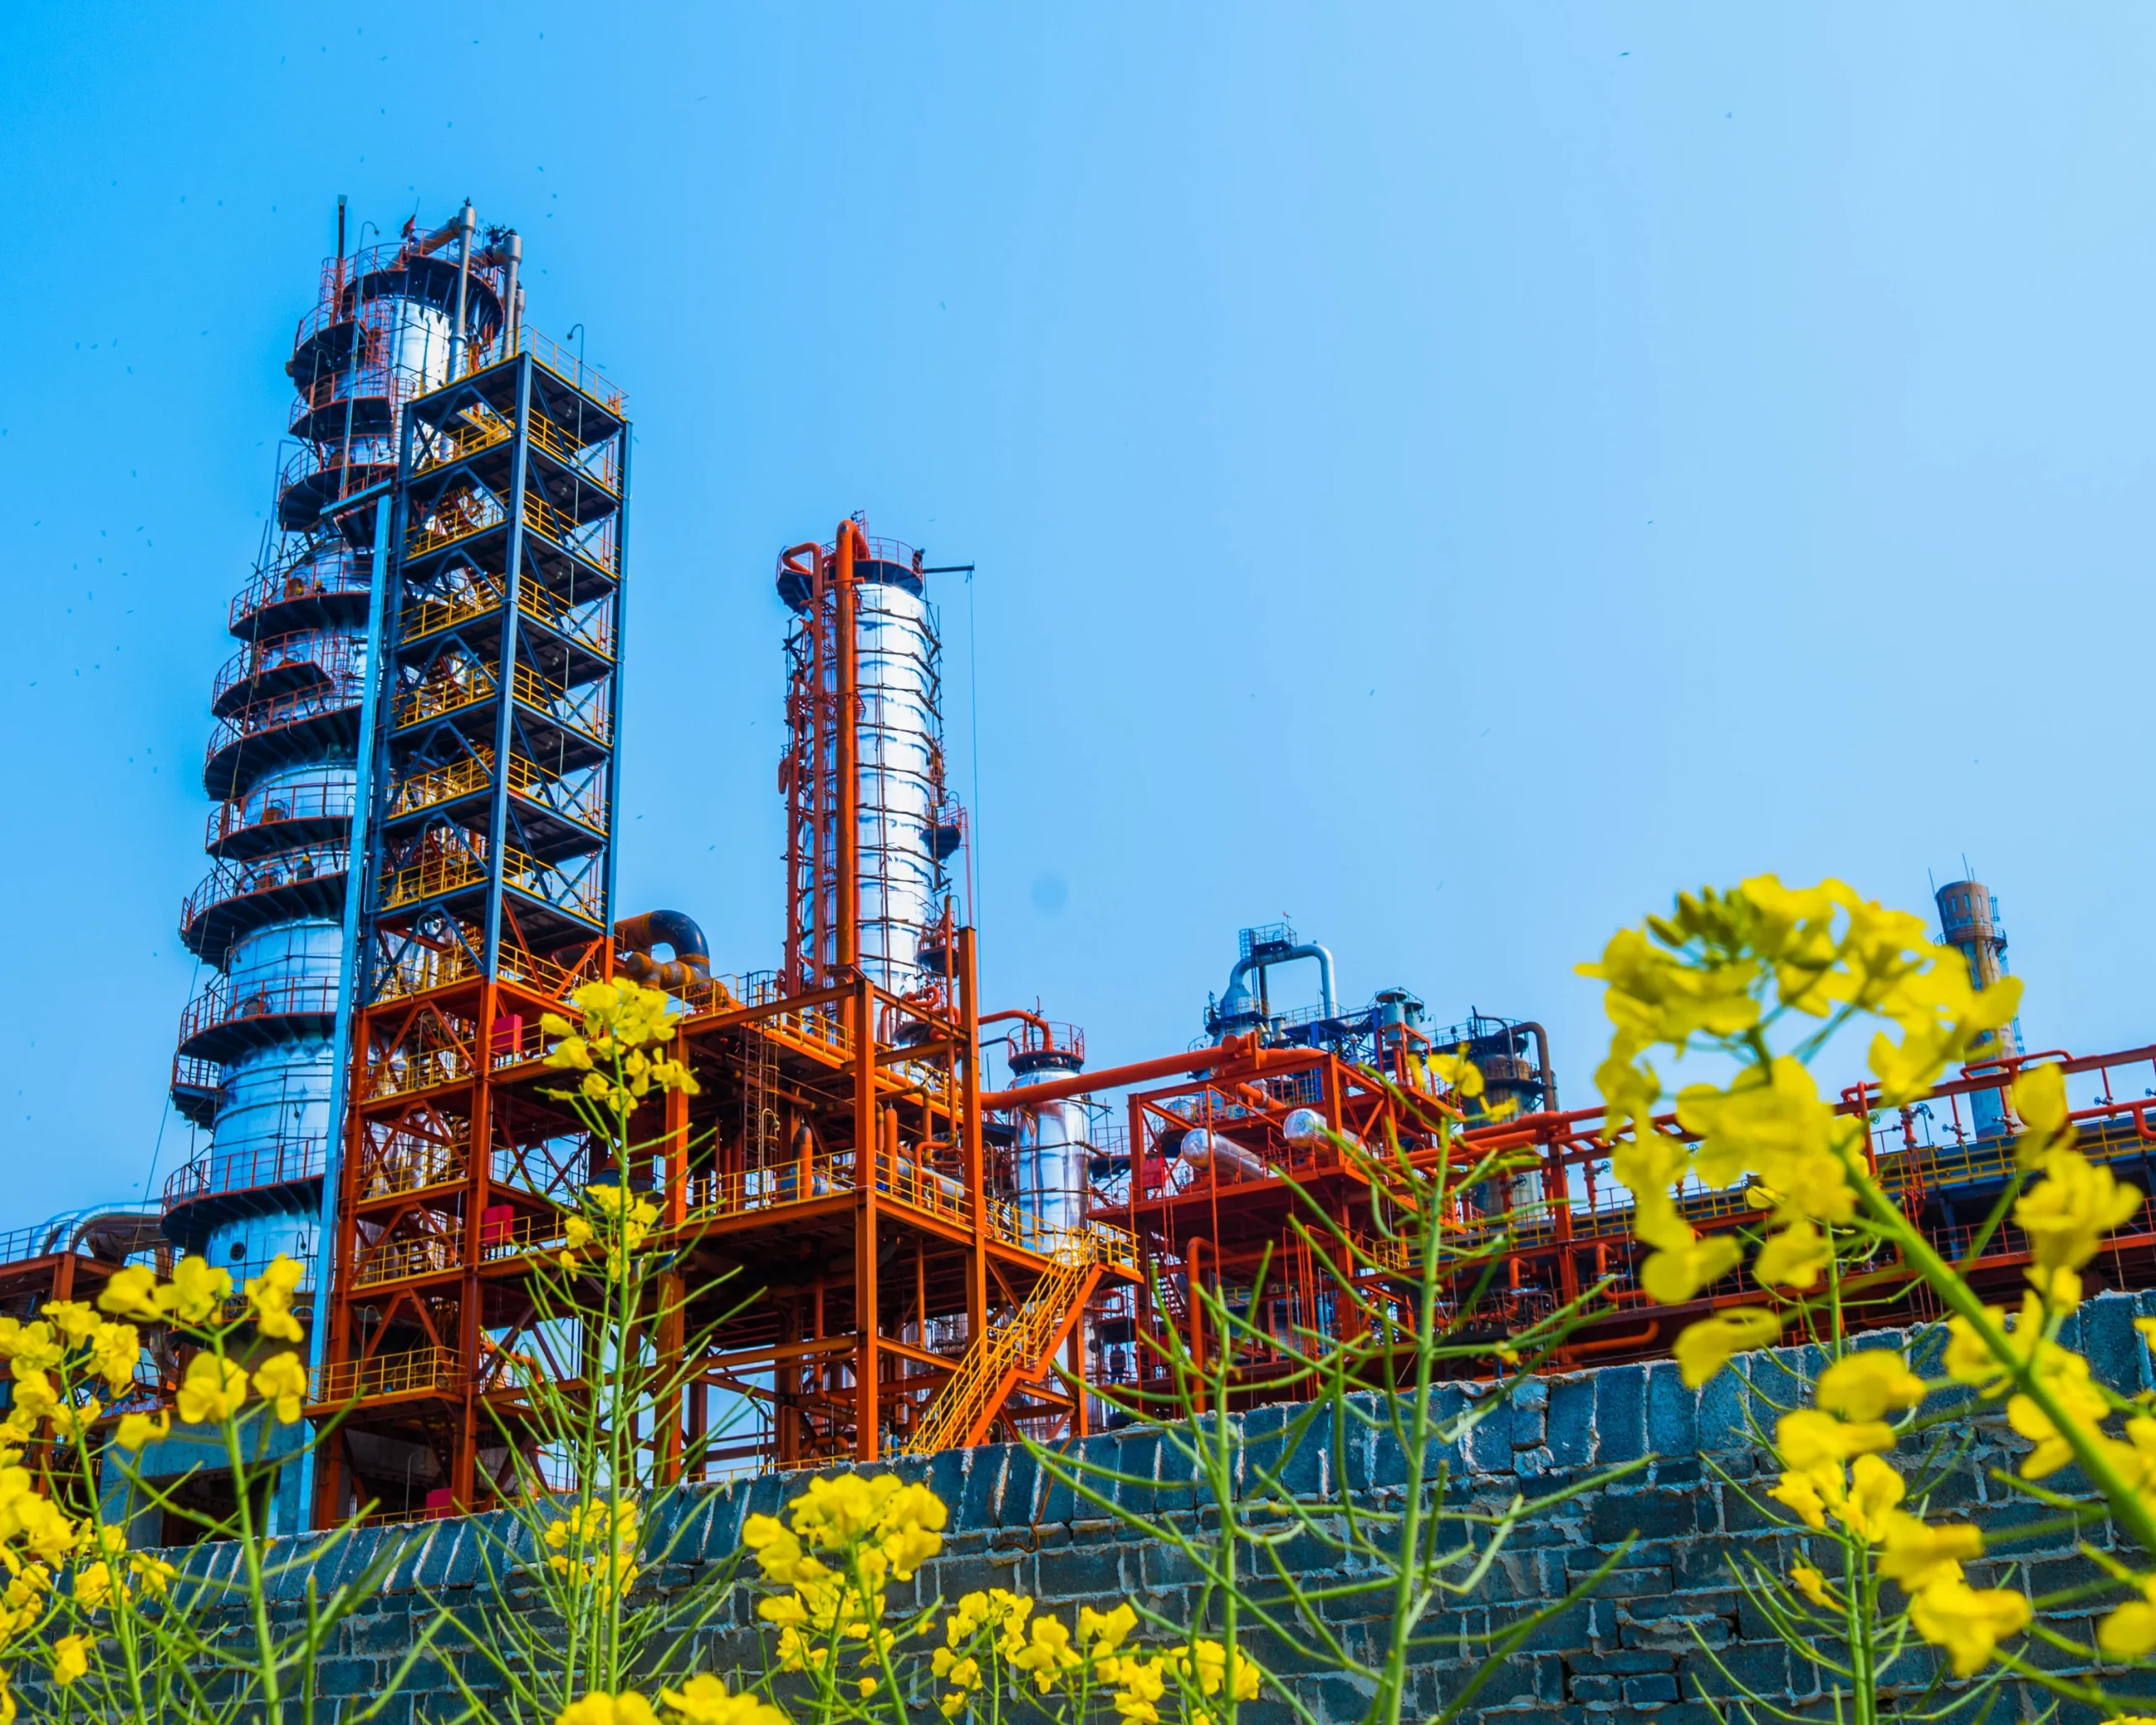 Vibrant refinery shines in sunlight amidst a picturesque field of blooming flowers, creating a striking contrast of nature and industry.